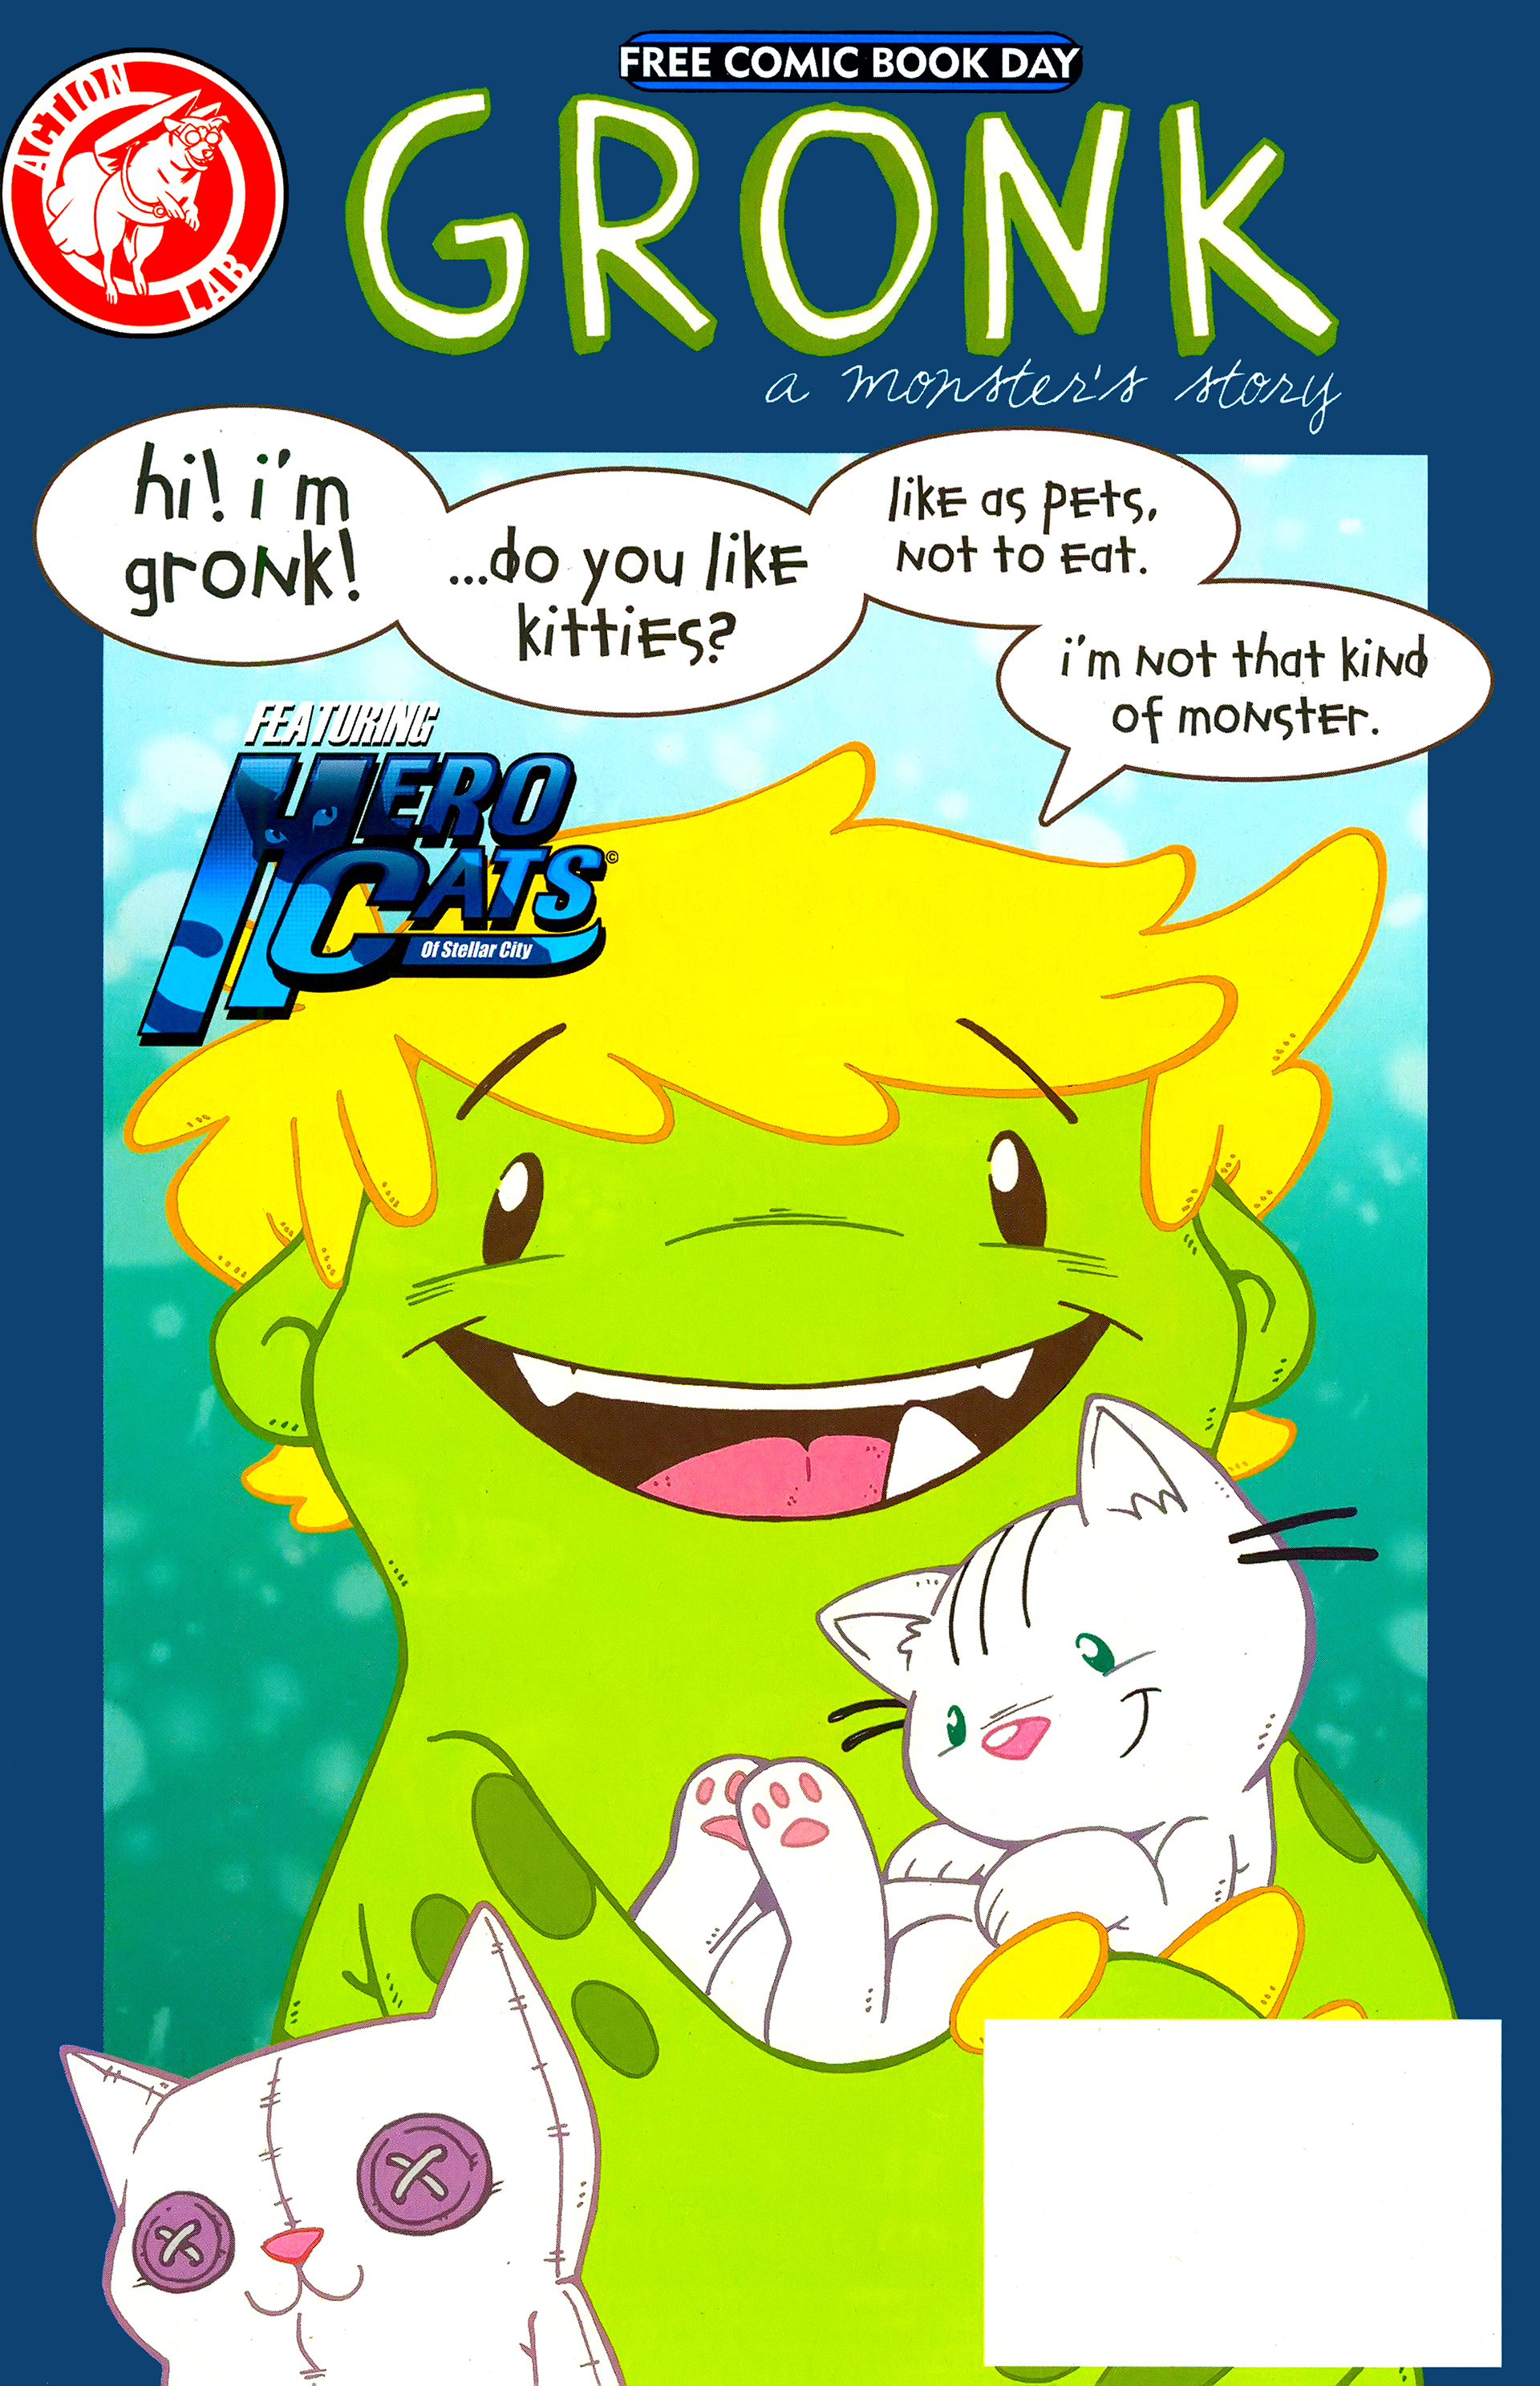 Read online Free Comic Book Day 2015 comic -  Issue # Gronk-Hero Cats - 1